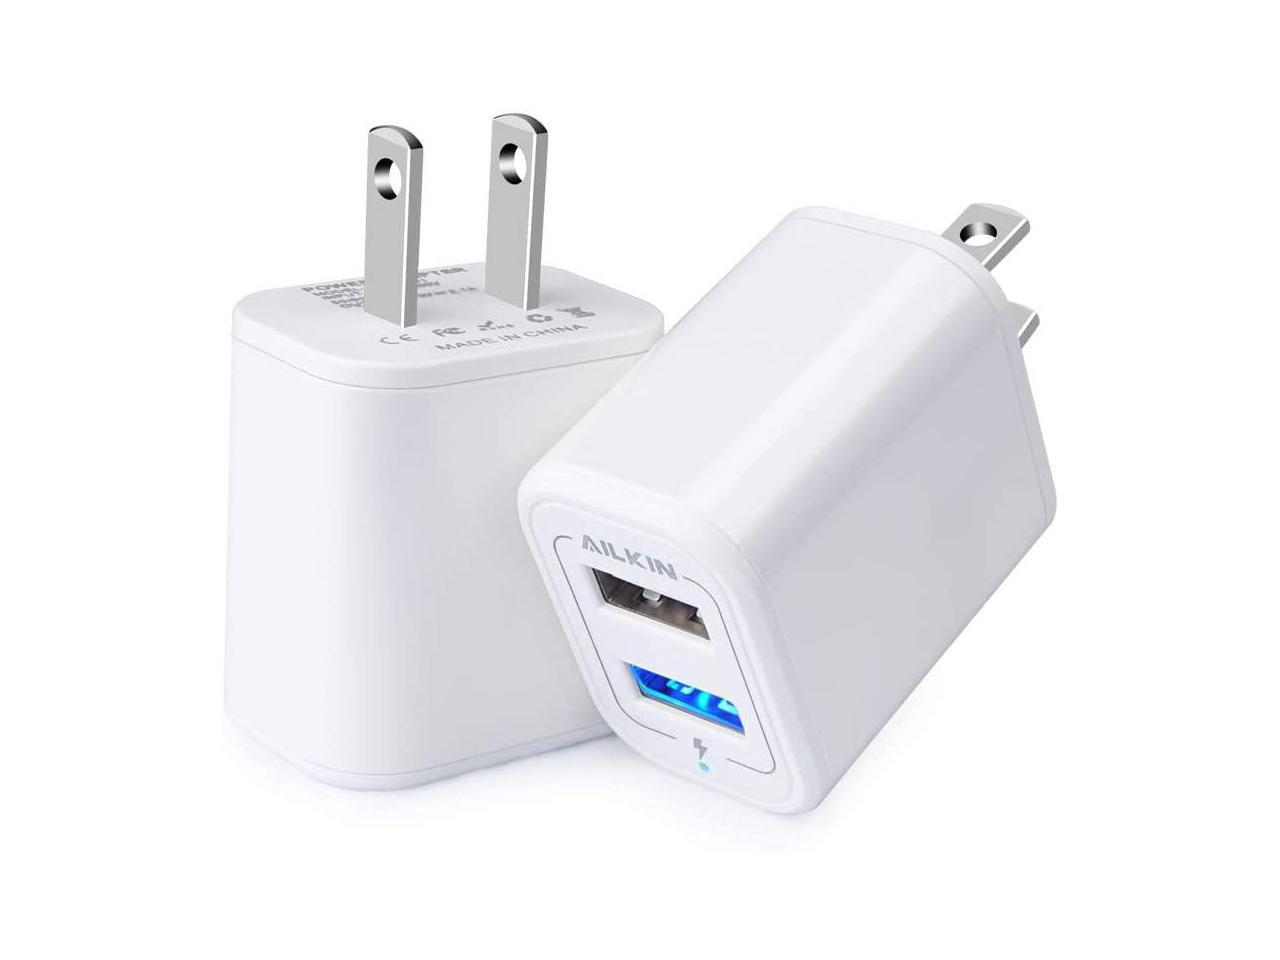 7,6 Plus 8 11Pro Max X Samsung Galaxy Power Adapter Cube 2 Port Charge Travel Brick Cell Quick Chargers Box cargador for iPhone SE Wall Charger Fast Charging Block AILKIN USB Plug LG iPad 